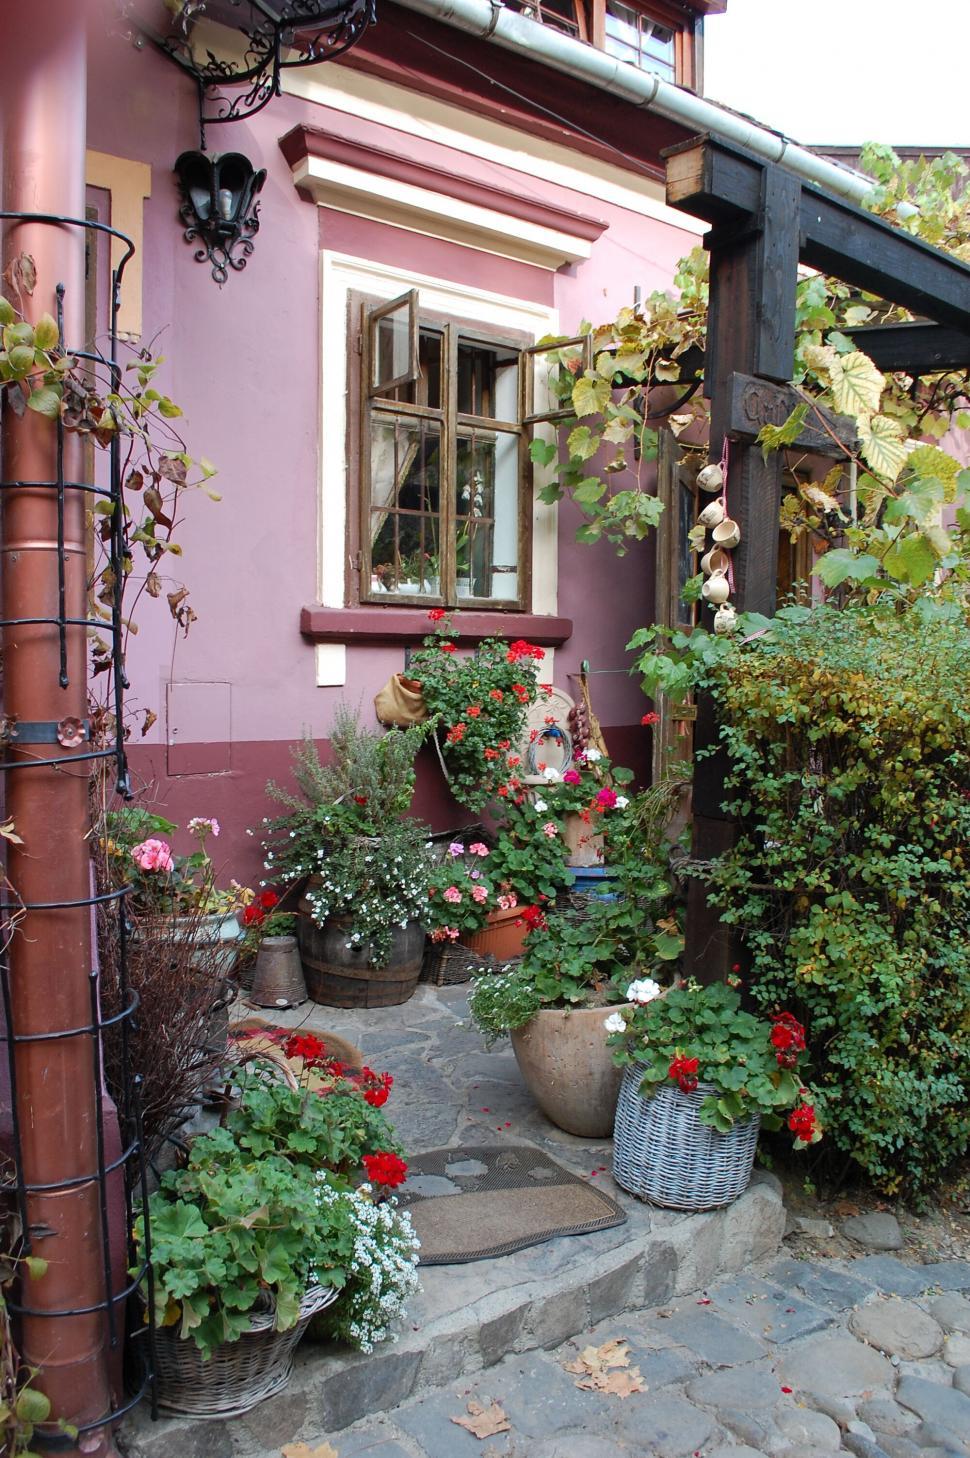 Free Image of A house with plants in pots 